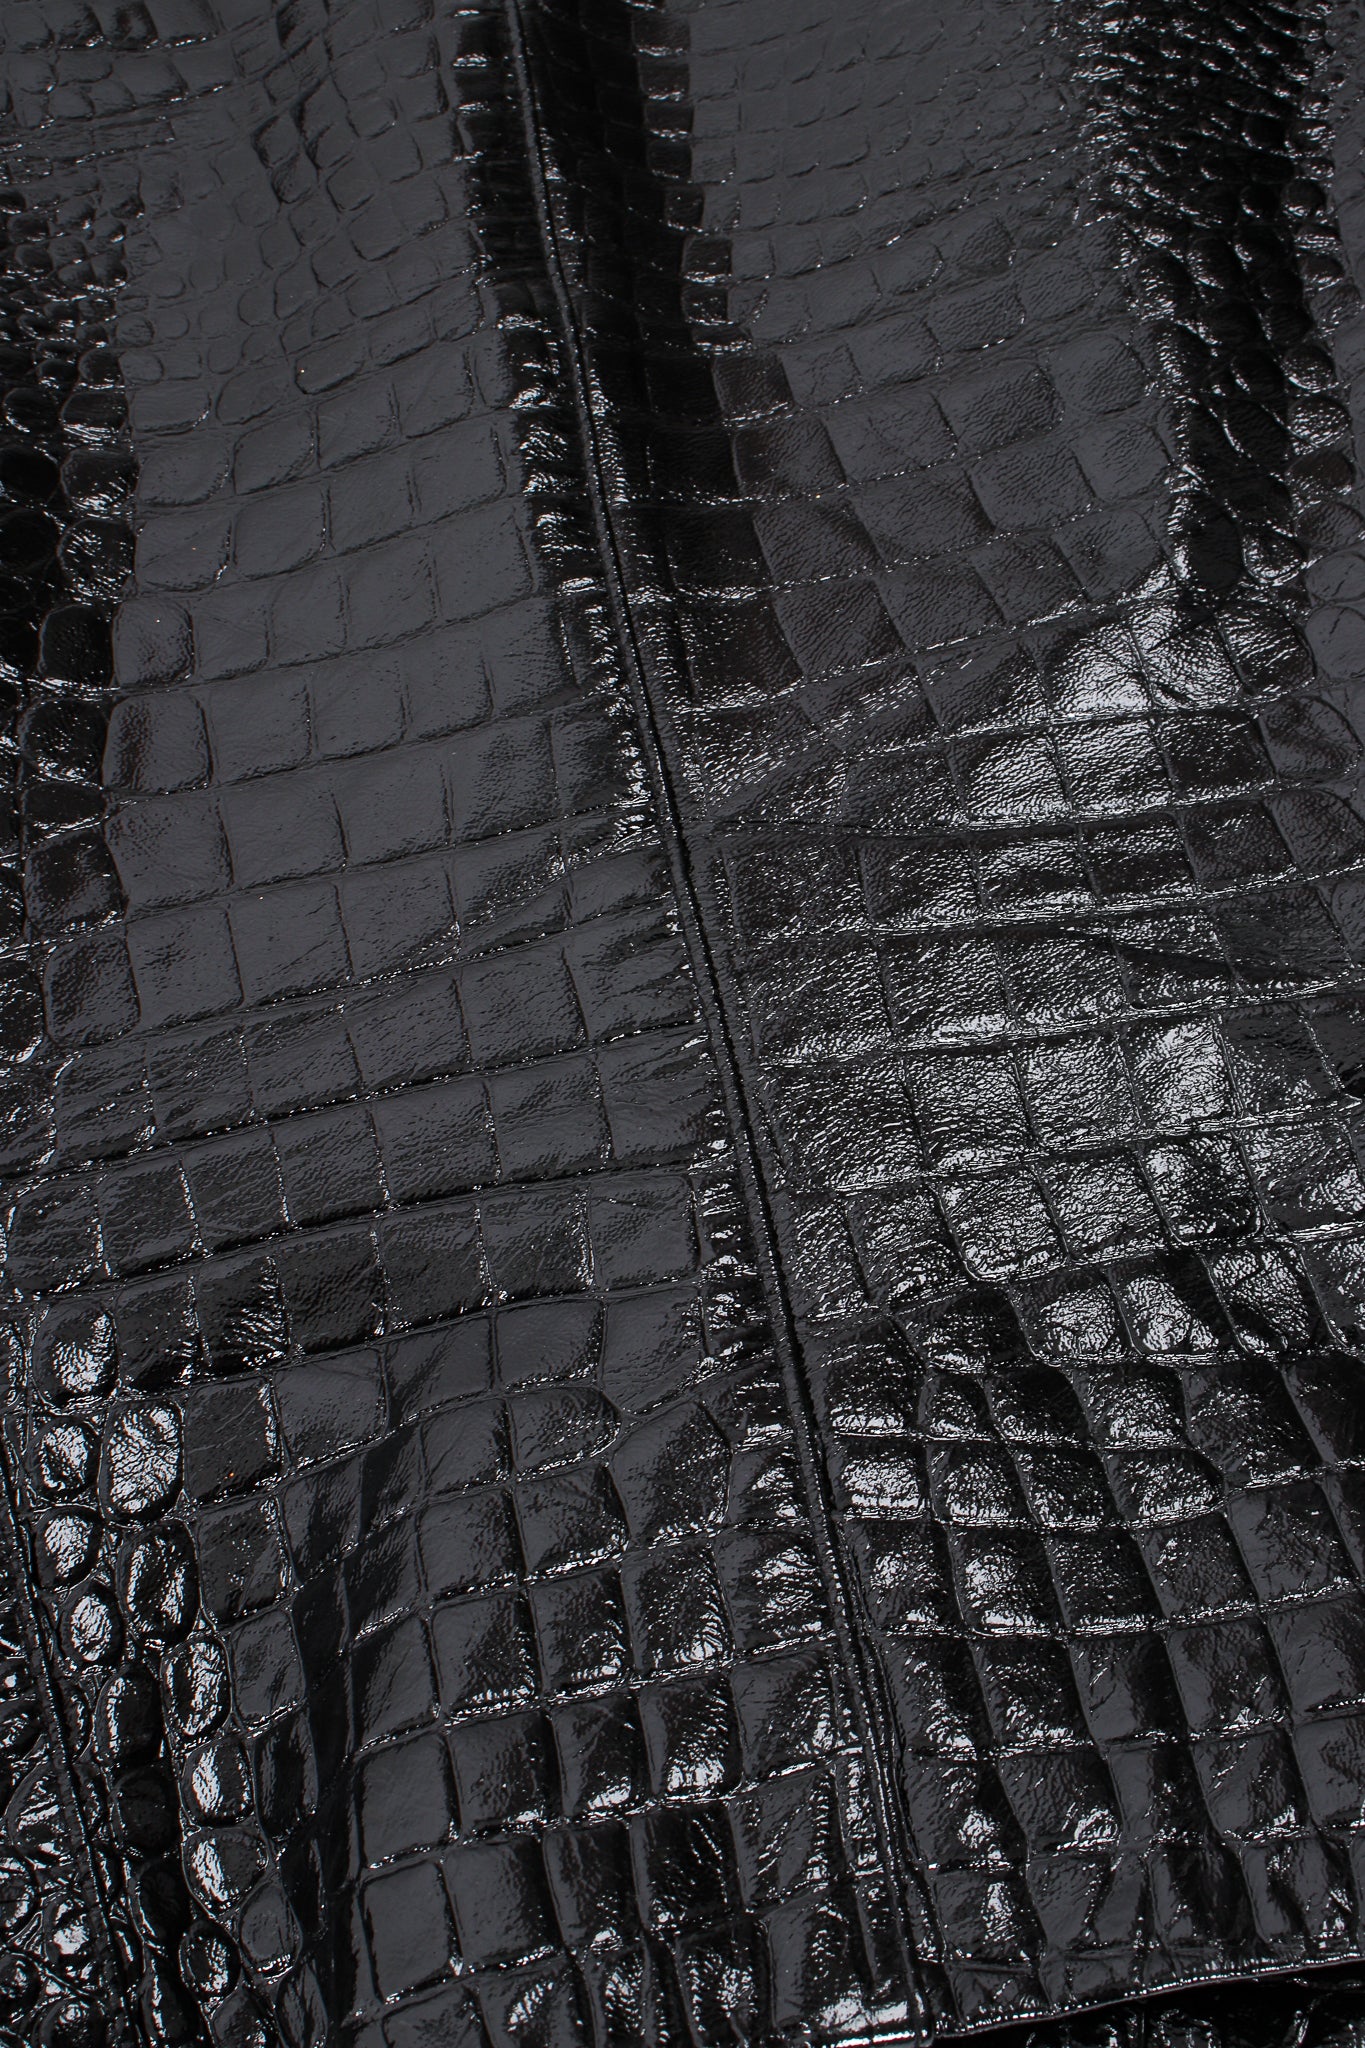 Vintage Escada Patent Leather Embossed Gator Jacket fabric texture and wear at Recess Los Angeles